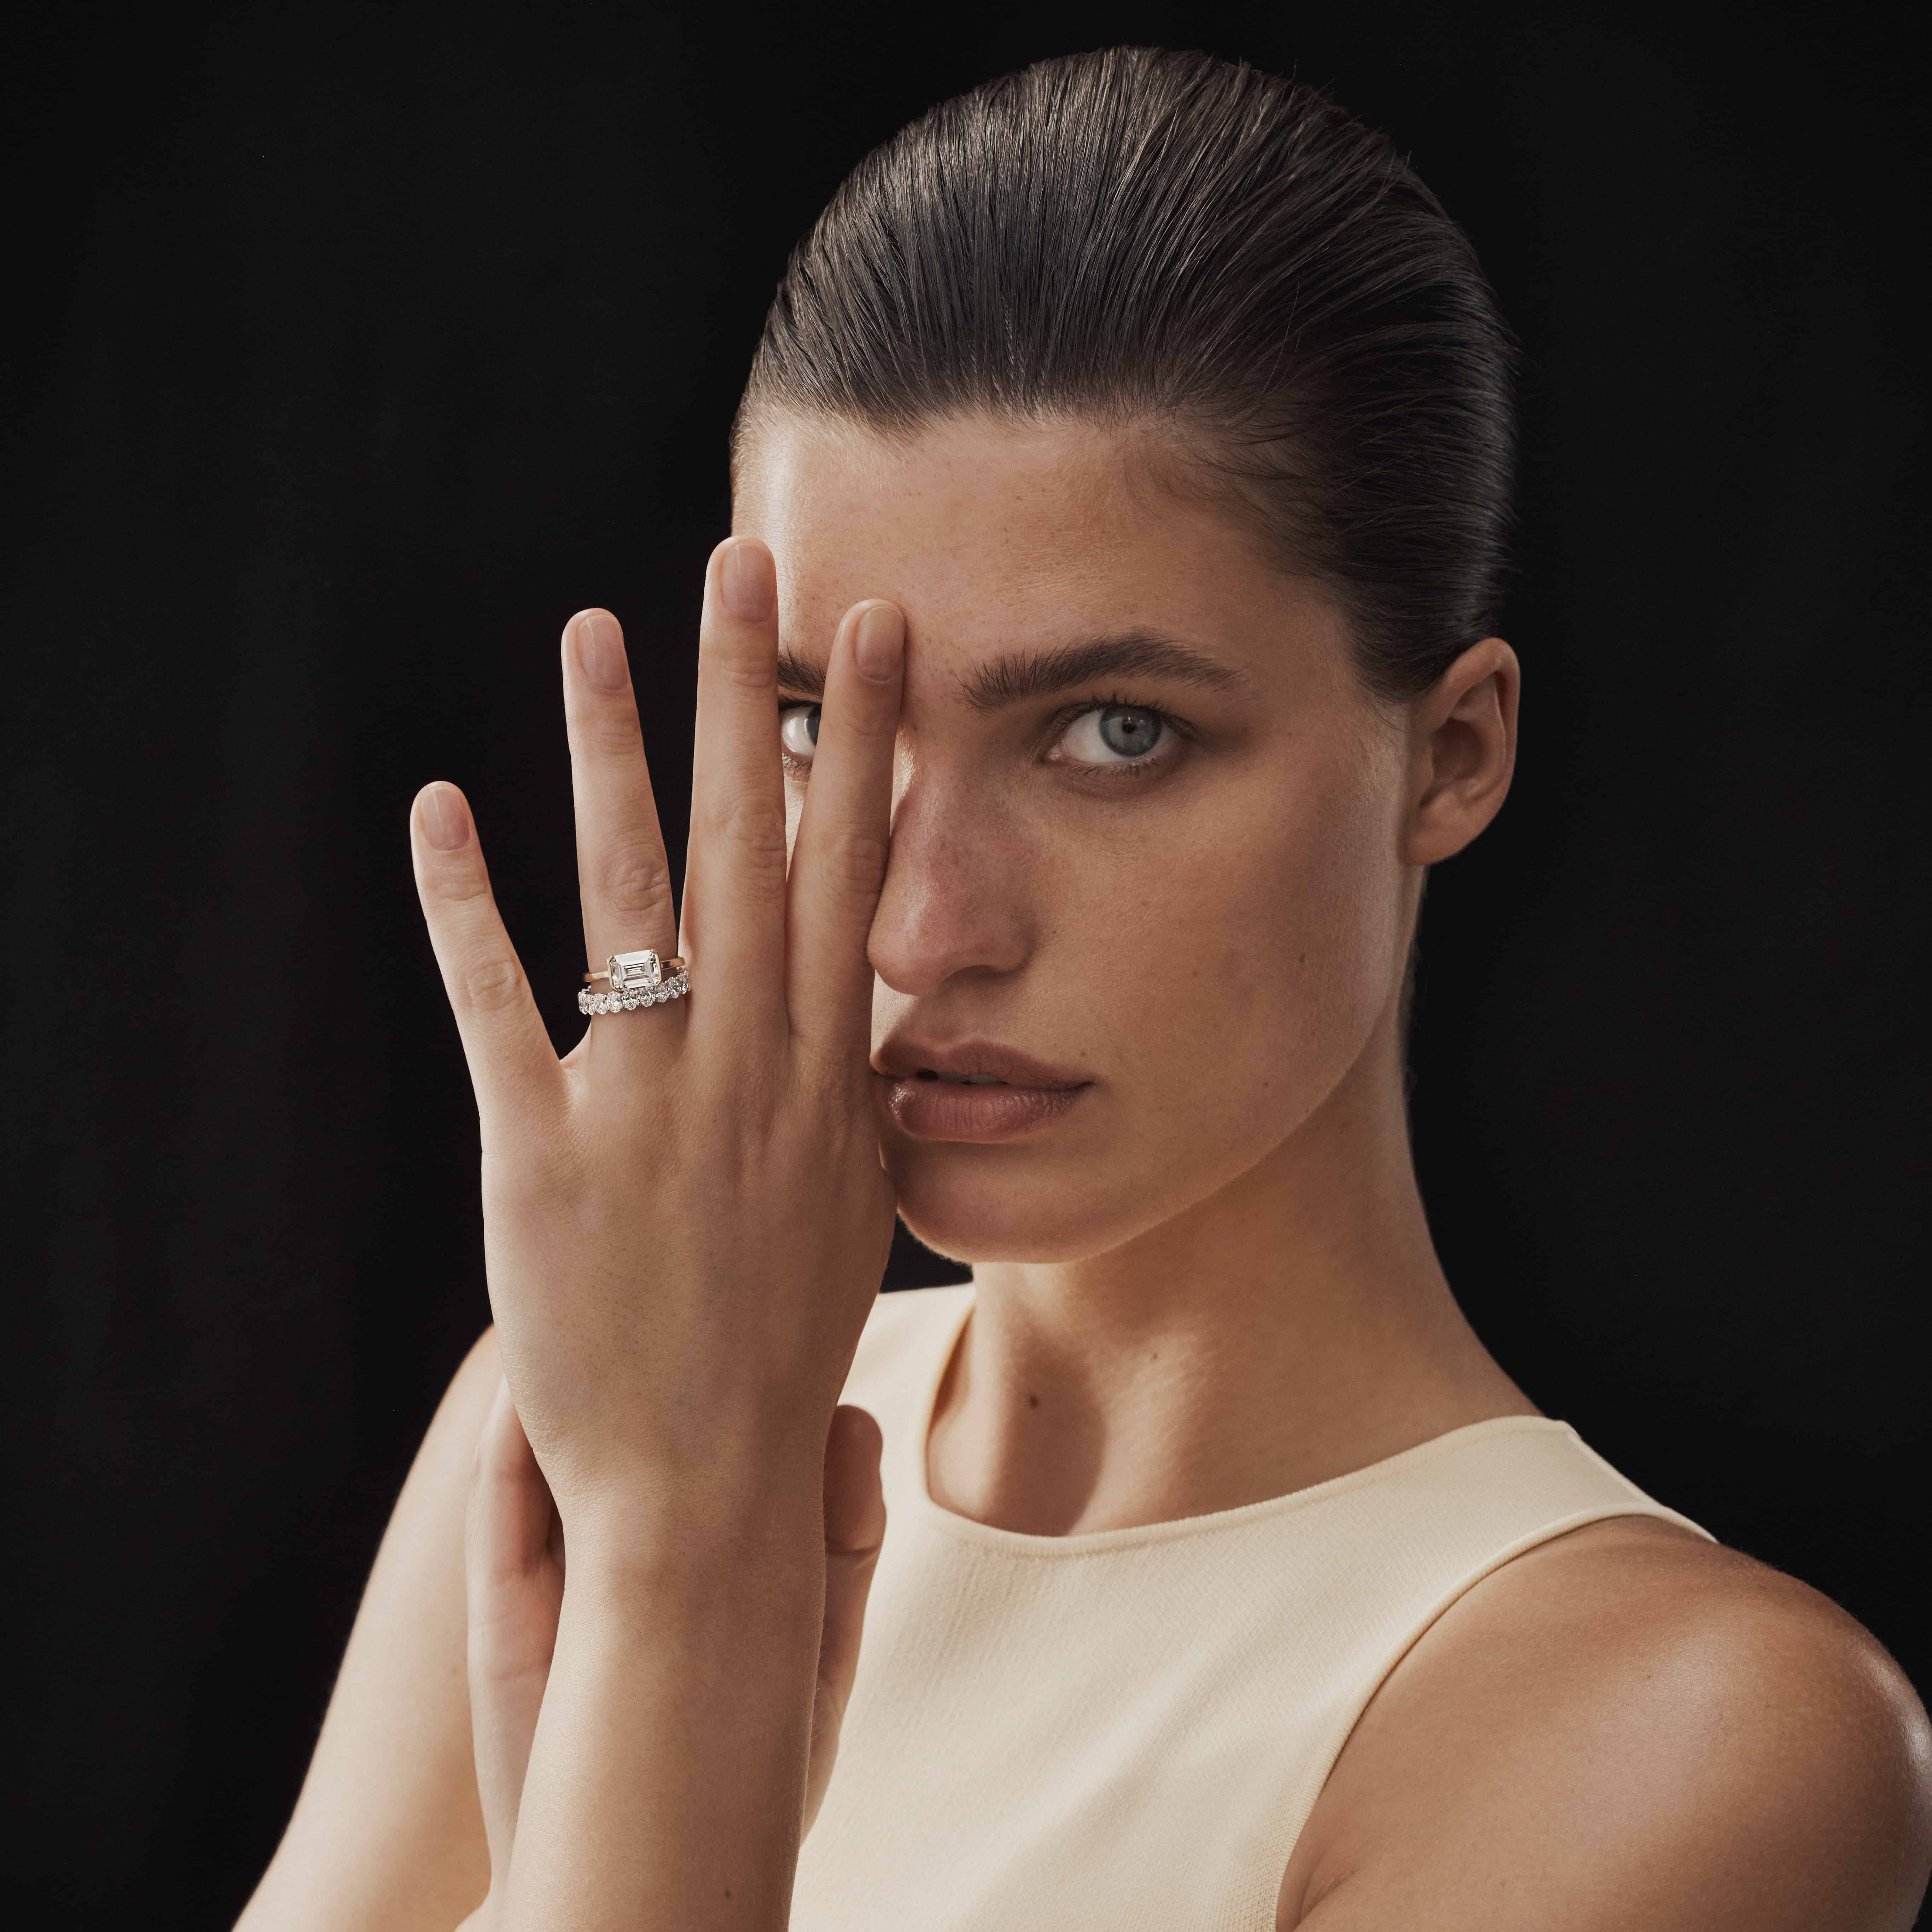 Image of young woman wearing a custom engagement ring designed by TenSevenSeven